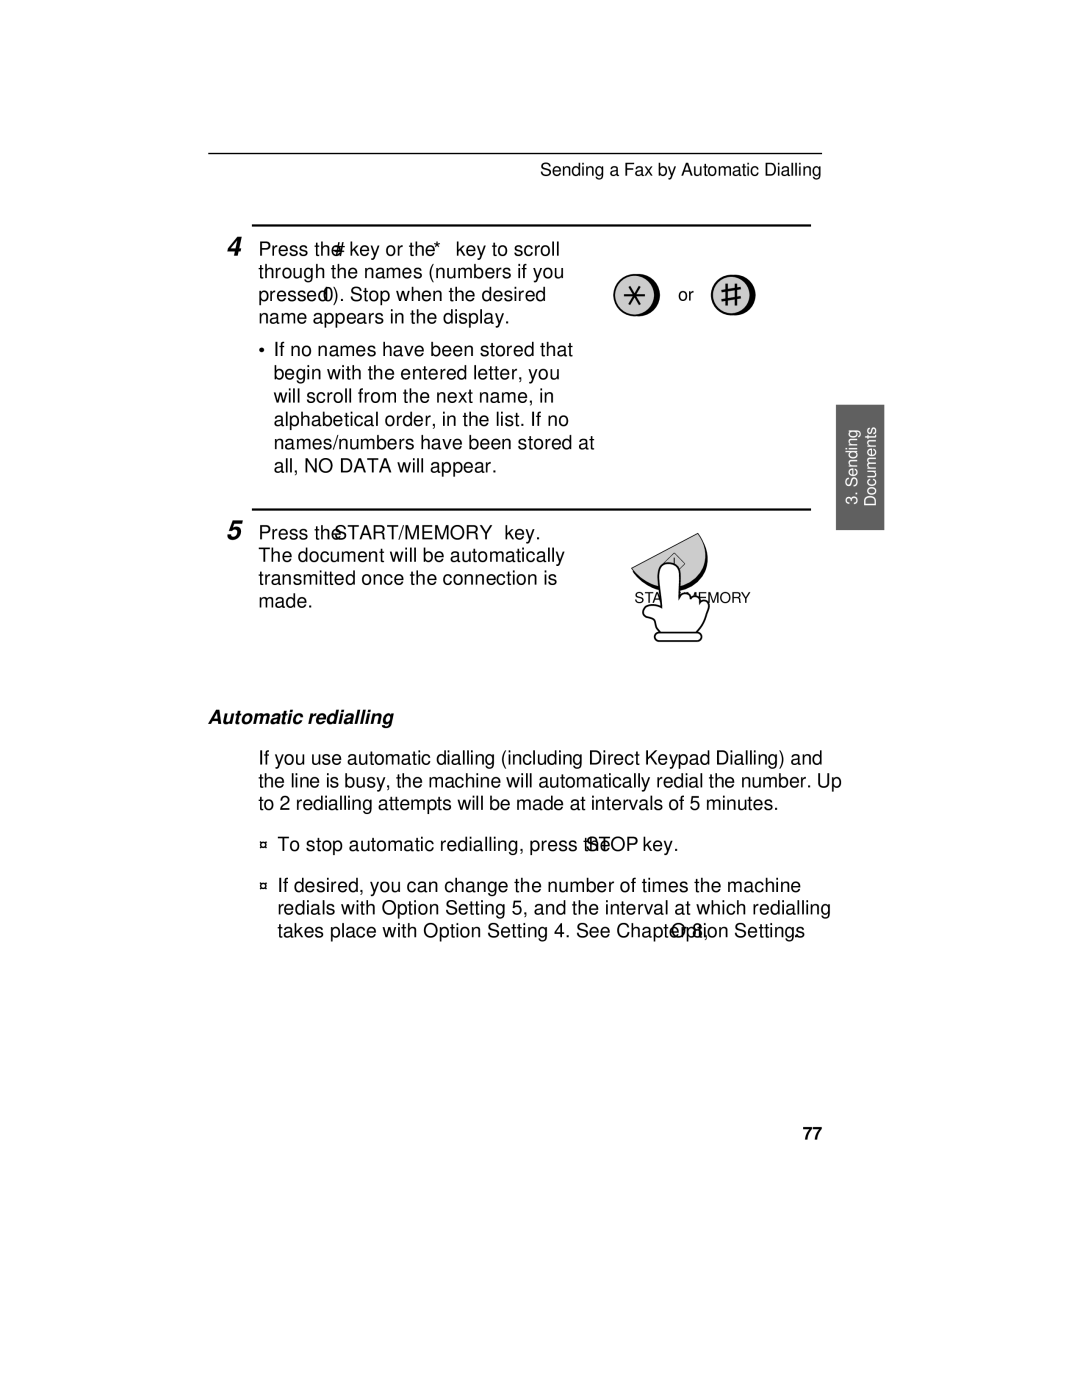 Sharp UX-470 operation manual Made, Automatic redialling 